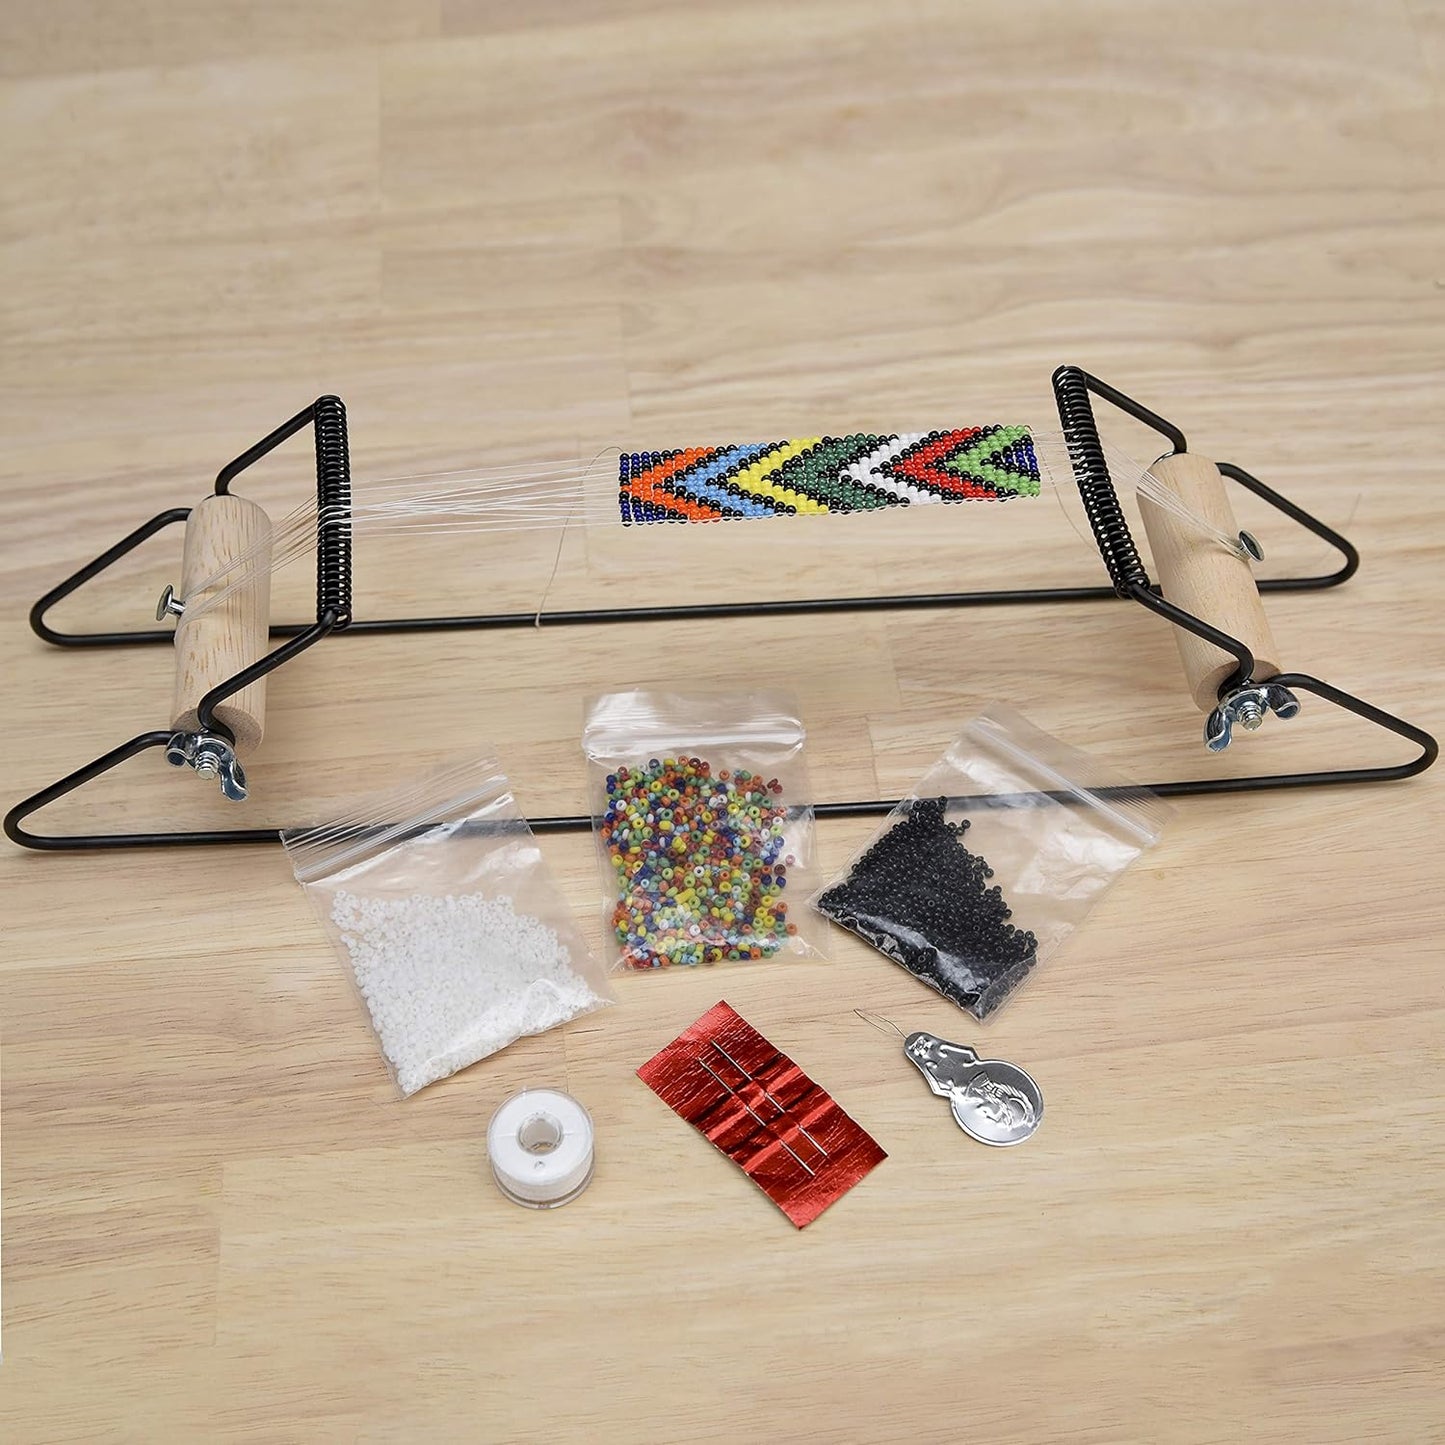 Metal Bead Loom Kit, Includes Loom (12.5" X 2.5" X 3"), Thread, Needles, and 18 Grams Glass Beads for Bracelets, Necklaces, Belts, and More